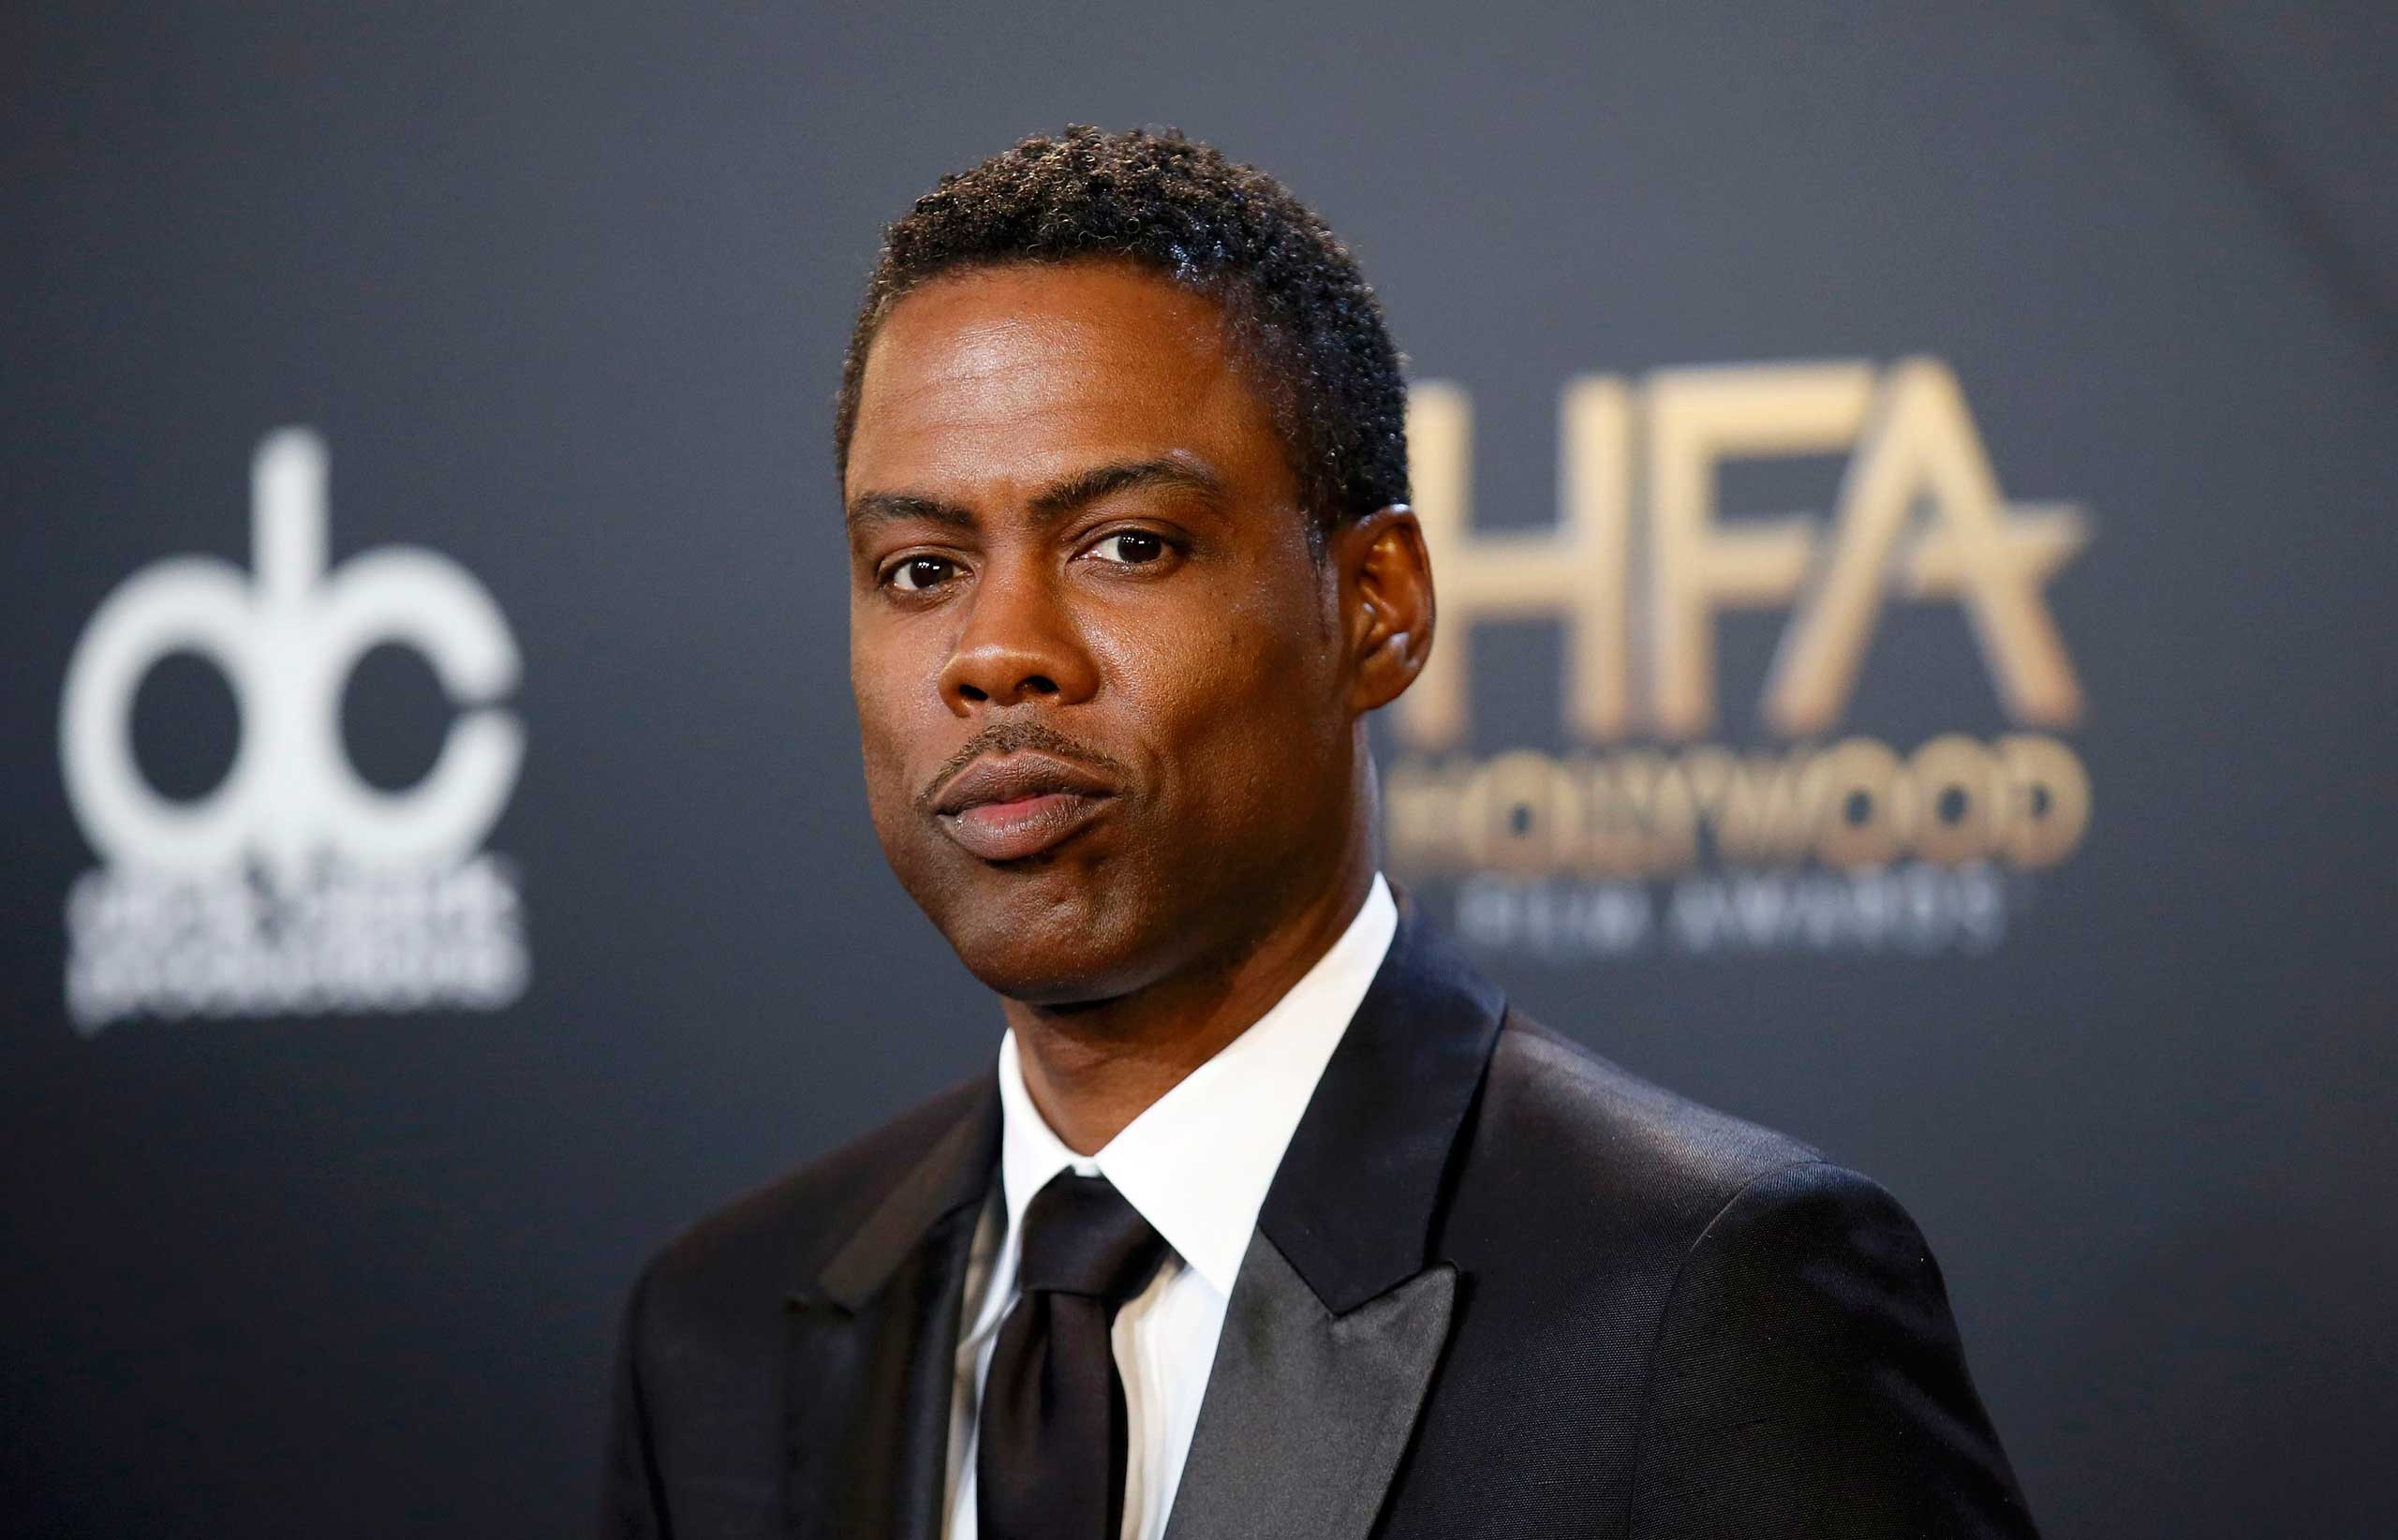 Chris Rock poses with his award during the Hollywood Film Awards in Hollywood